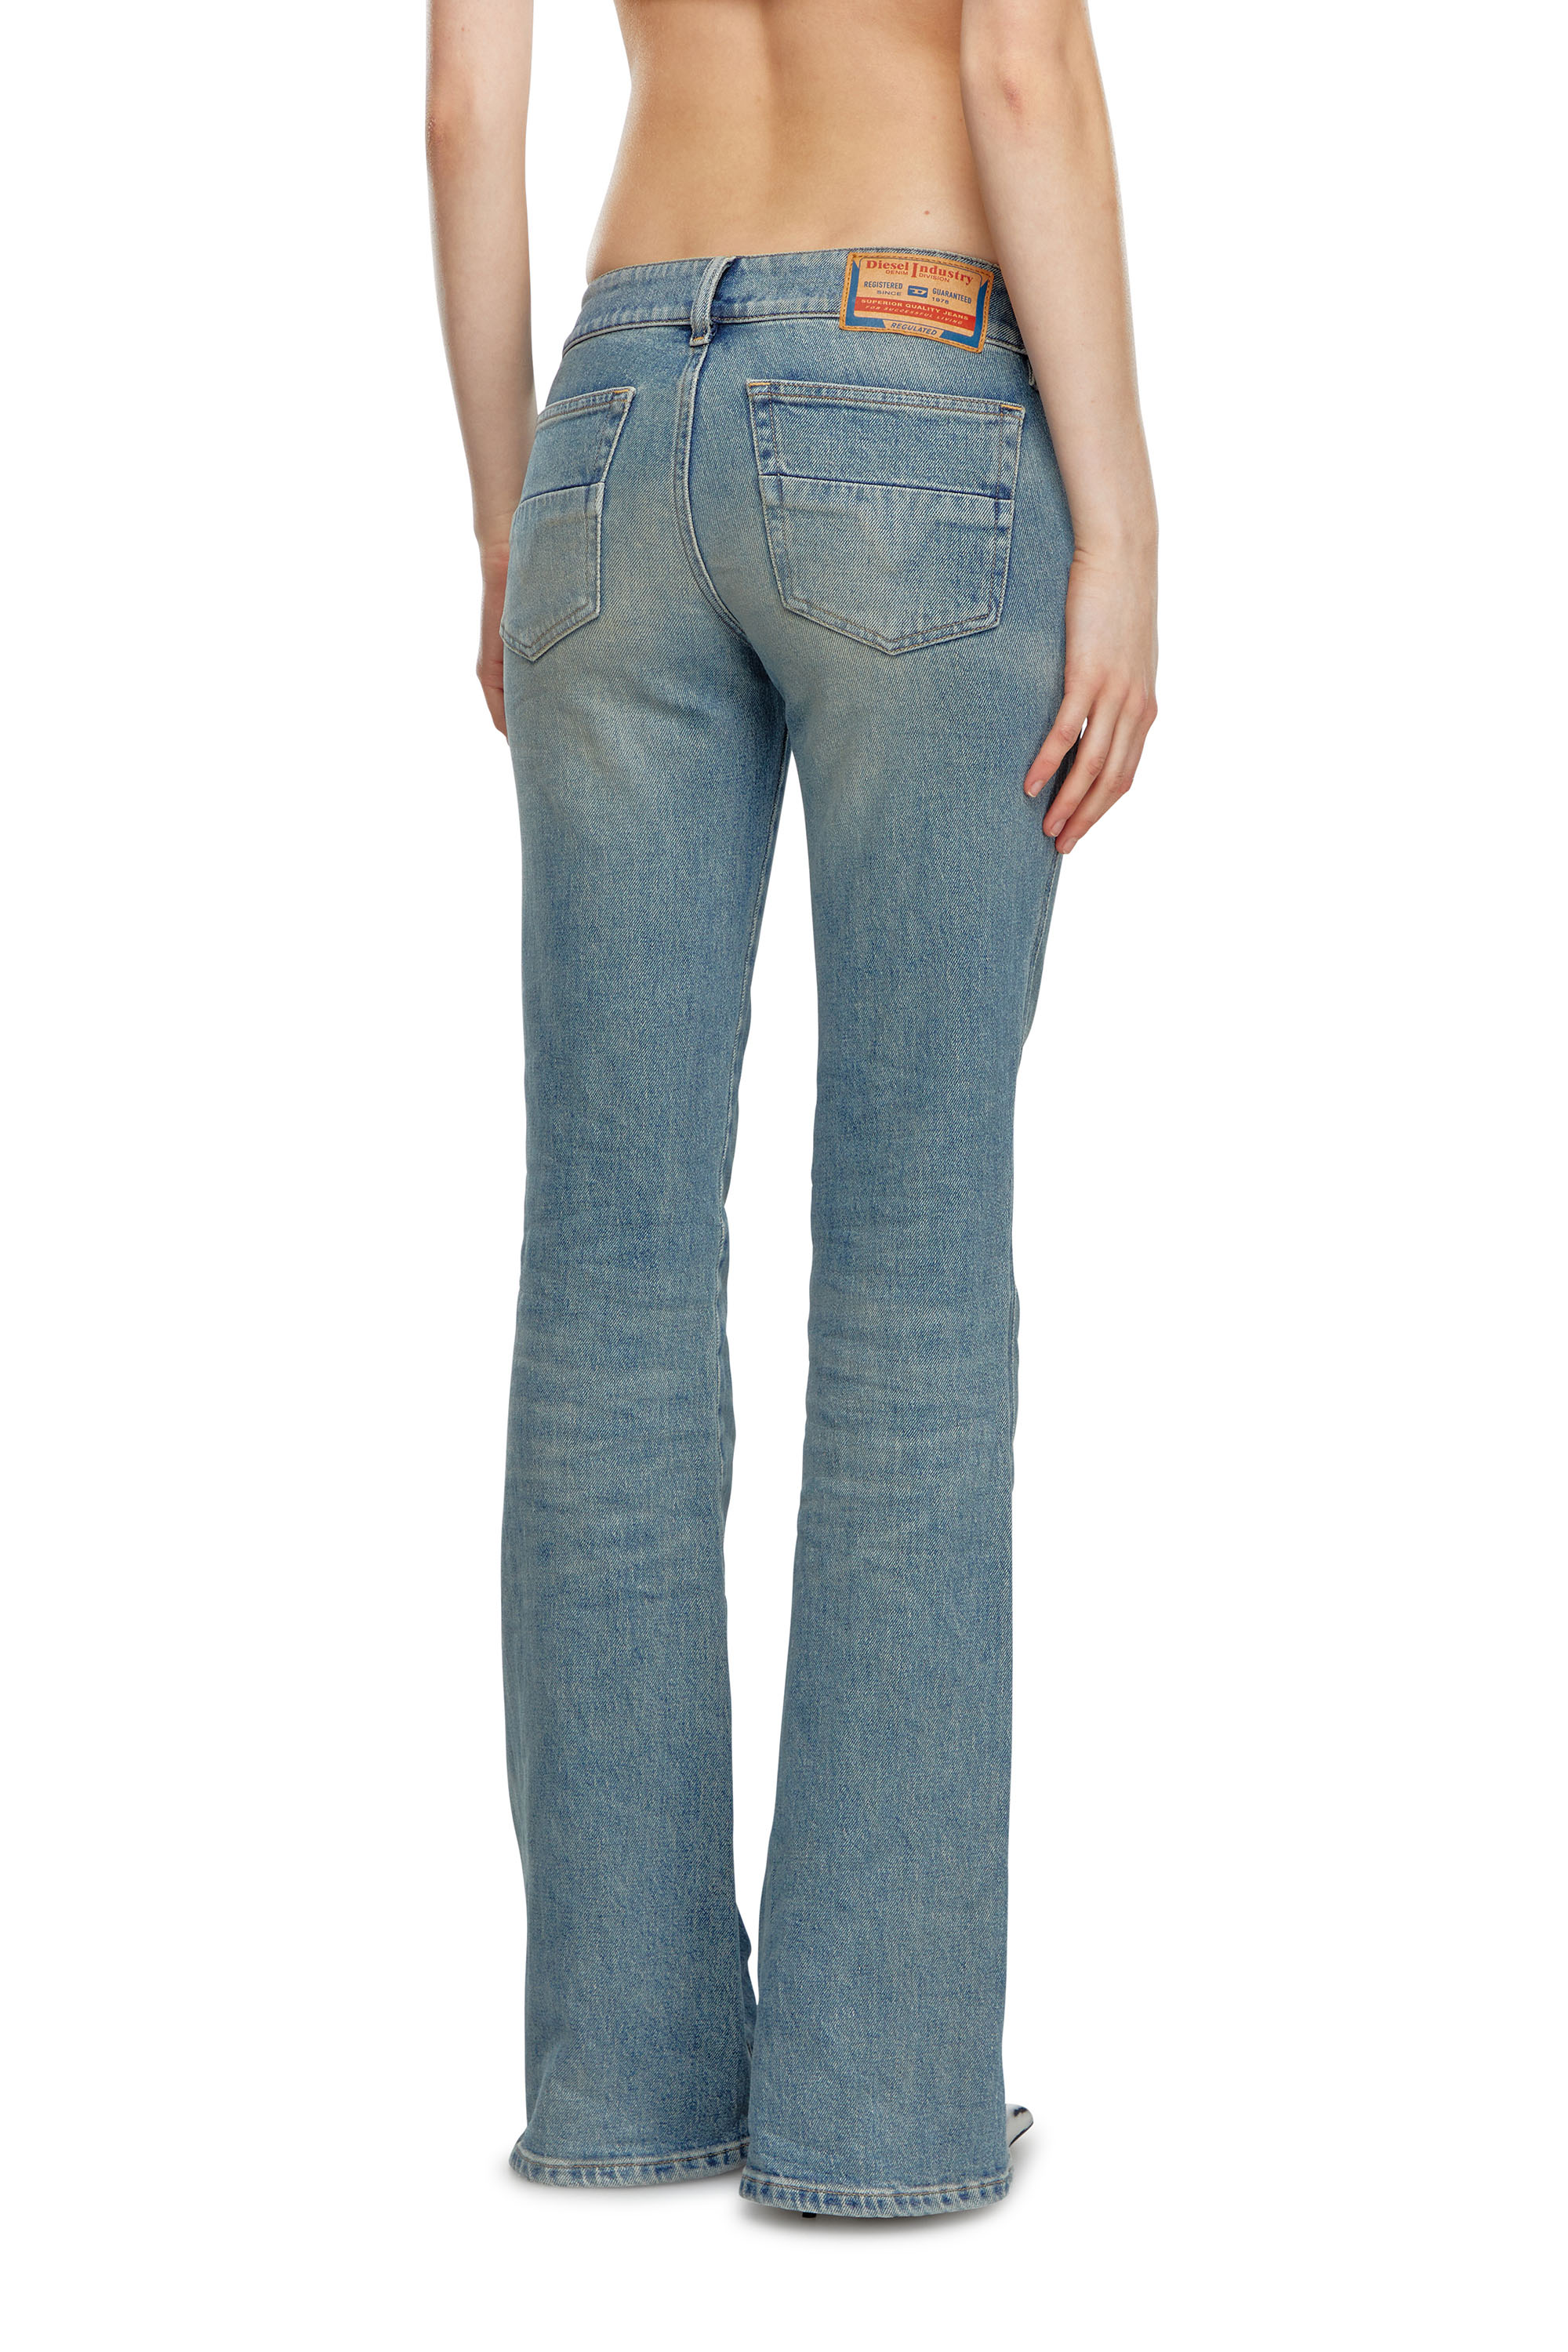 Diesel - Bootcut and Flare Jeans D-Hush 09J55, Mujer Bootcut y Flare Jeans - D-Hush in Azul marino - Image 3